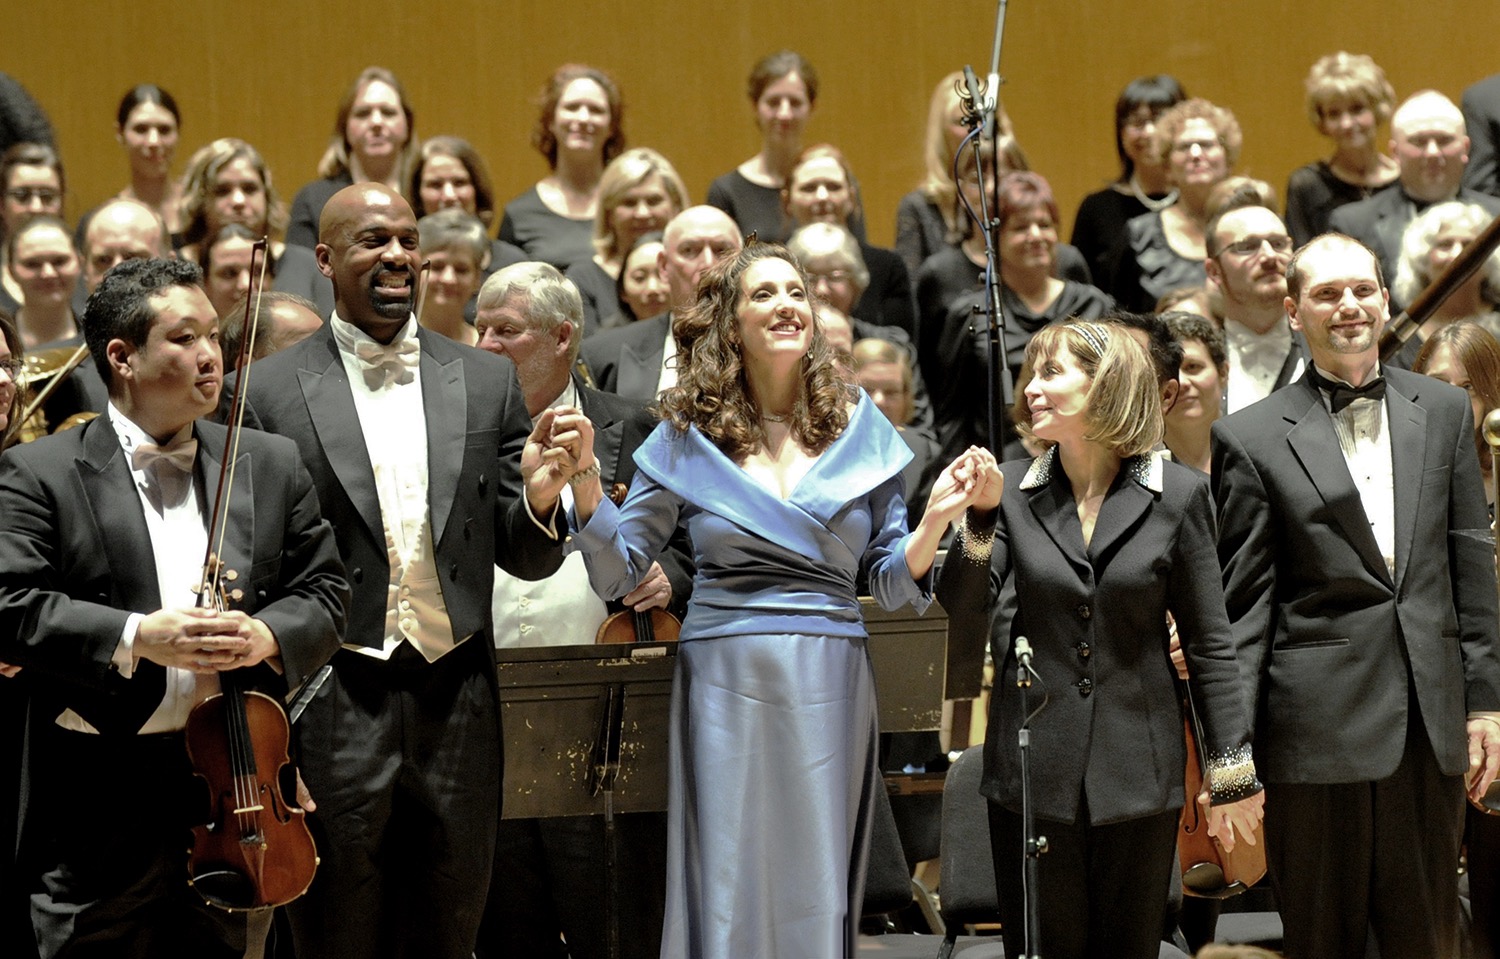  Brahms Requiem with Buffalo Philharmonic, with Baritone Darren Stokes and Conductor JoAnn Falletta  Photo by Enid Bloch 